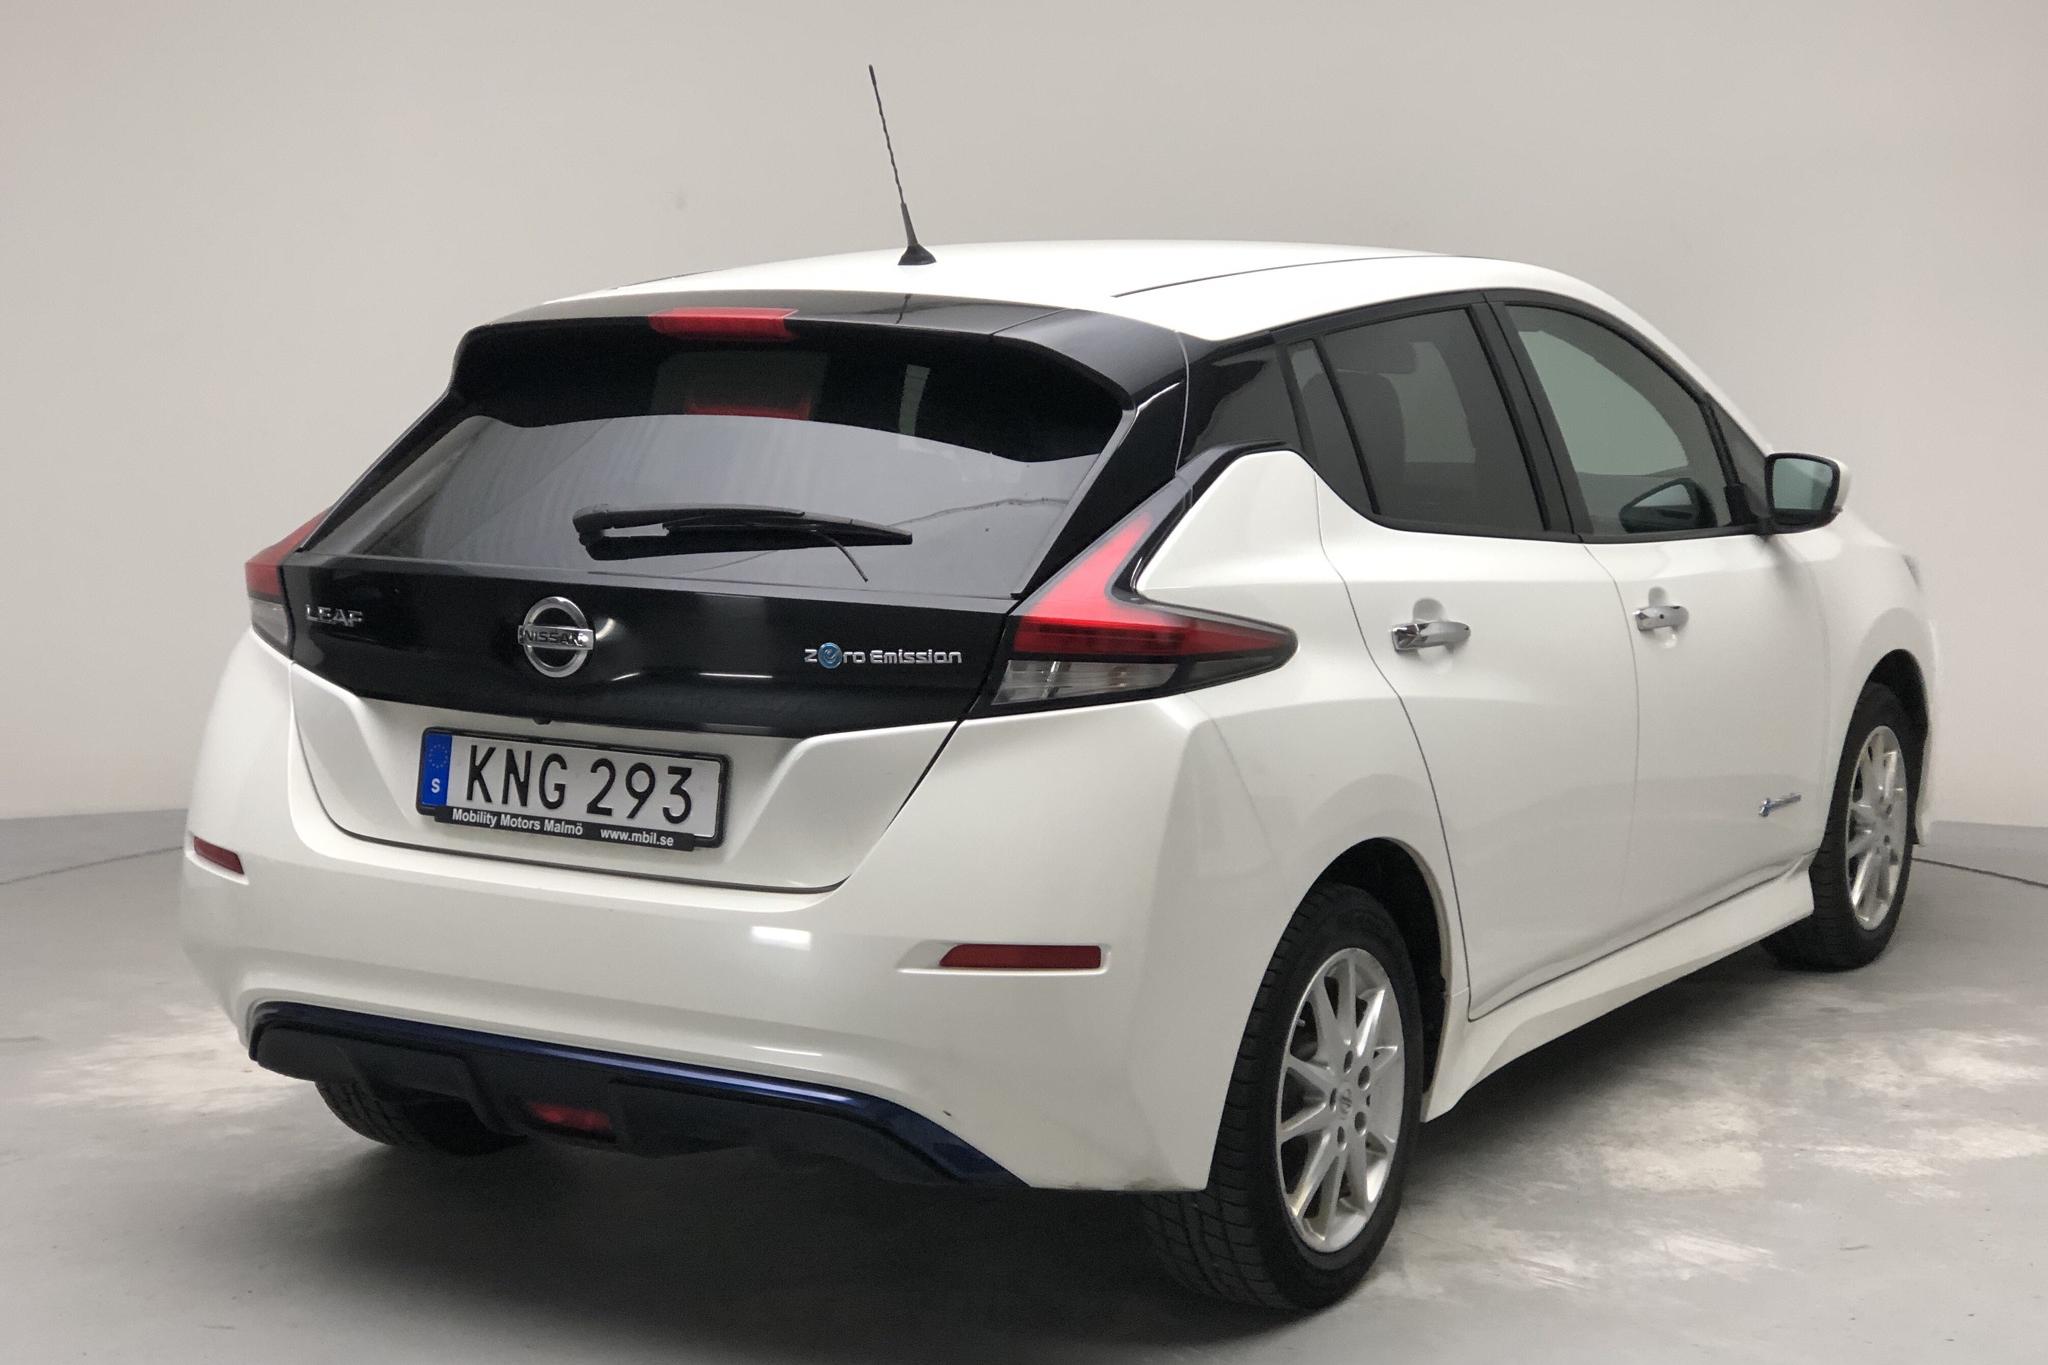 Nissan LEAF 5dr 39 kWh (150hk) - 78 950 km - Automatic - white - 2018